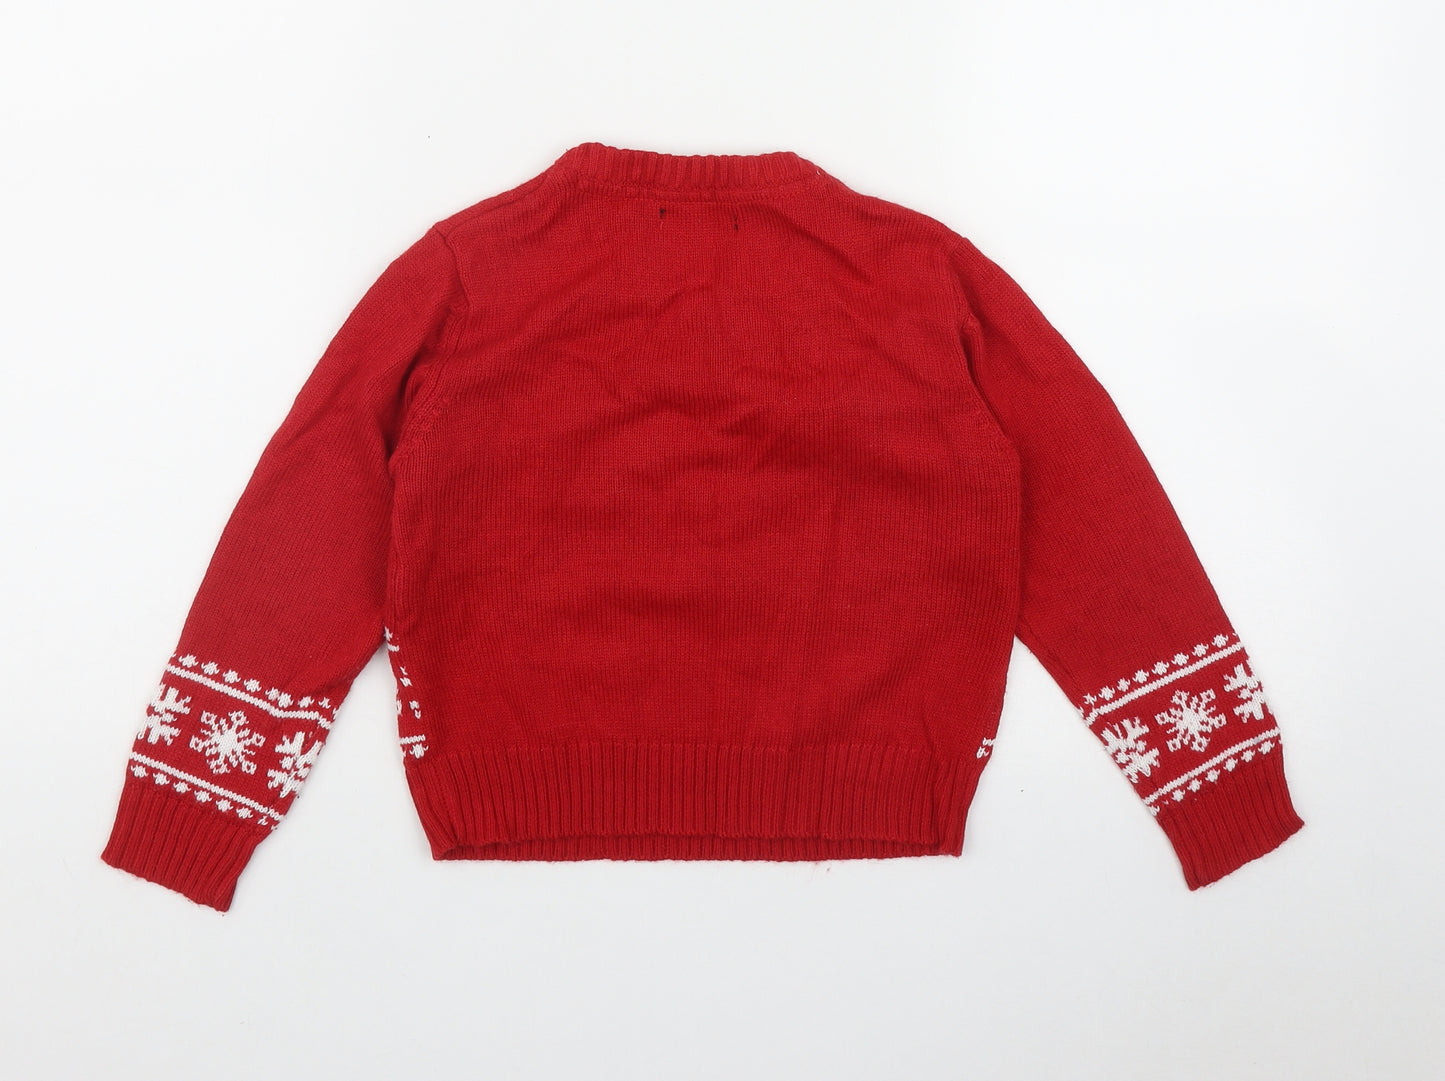 Pole Nord Boys Red Round Neck  Acrylic Pullover Jumper Size 5-6 Years   - Gingerbread Man